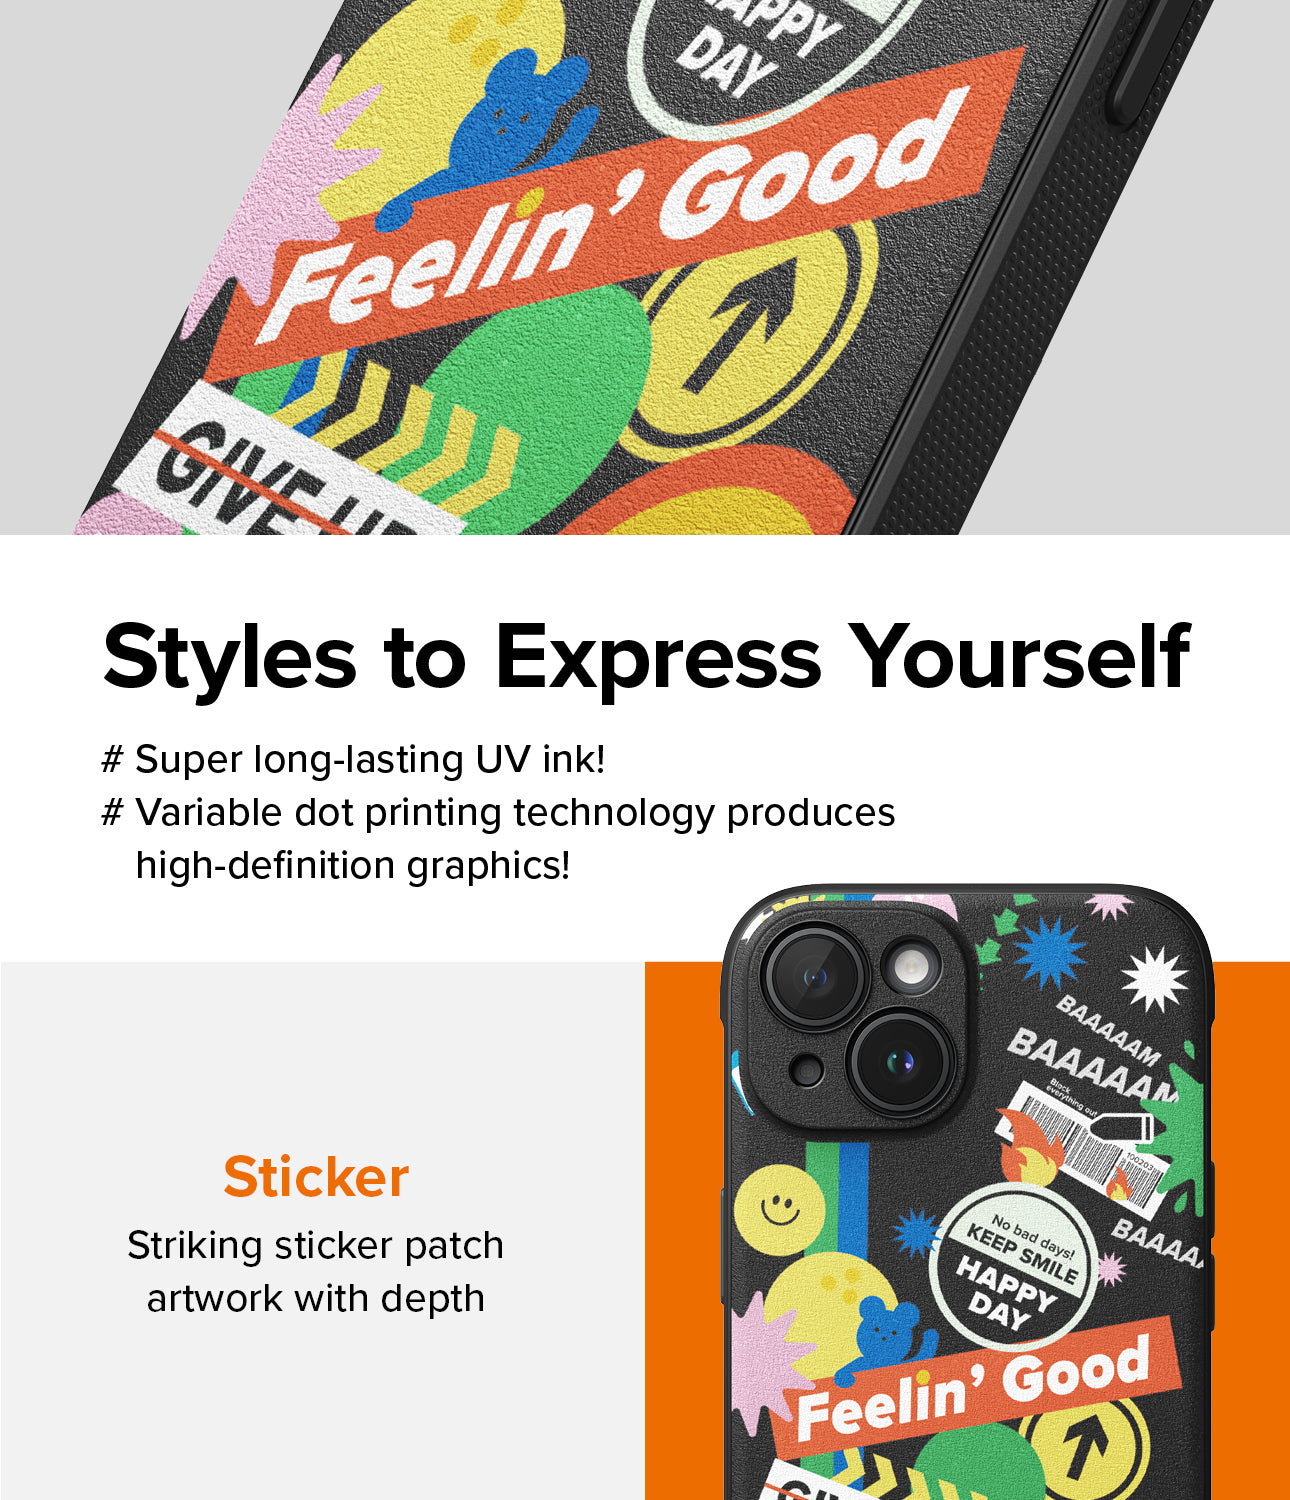 iPhone 15 Case | Onyx Design - Styles to Express Yourself. # Super long-lasting UV ink! # Variable dot printing technology produces high-definition graphics! Striking sticker patch artwork with depth.